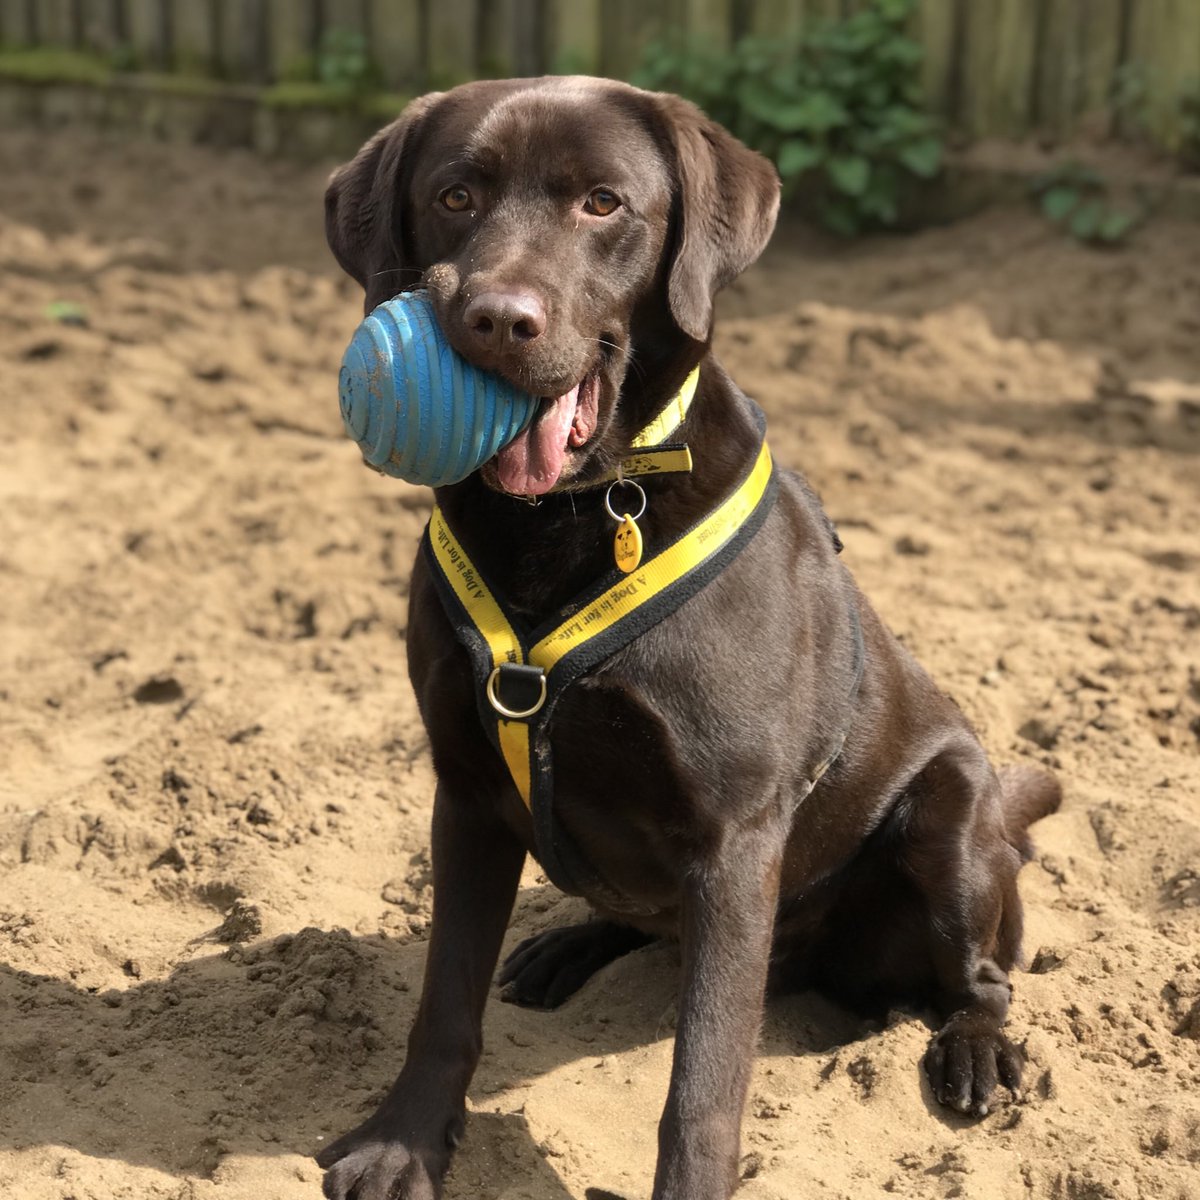 BRUNO with his new favourite toy. 💛 He loves his squeaky ball. 💛 He is a 2-year-old Labrador @DogsTrust #Ilfracombe. dogstrust.org.uk/rehoming/dogs/… 🏡 #ADogIsForLife #RescueDog 🐶#AdoptARescue #LoveDogs 🐾